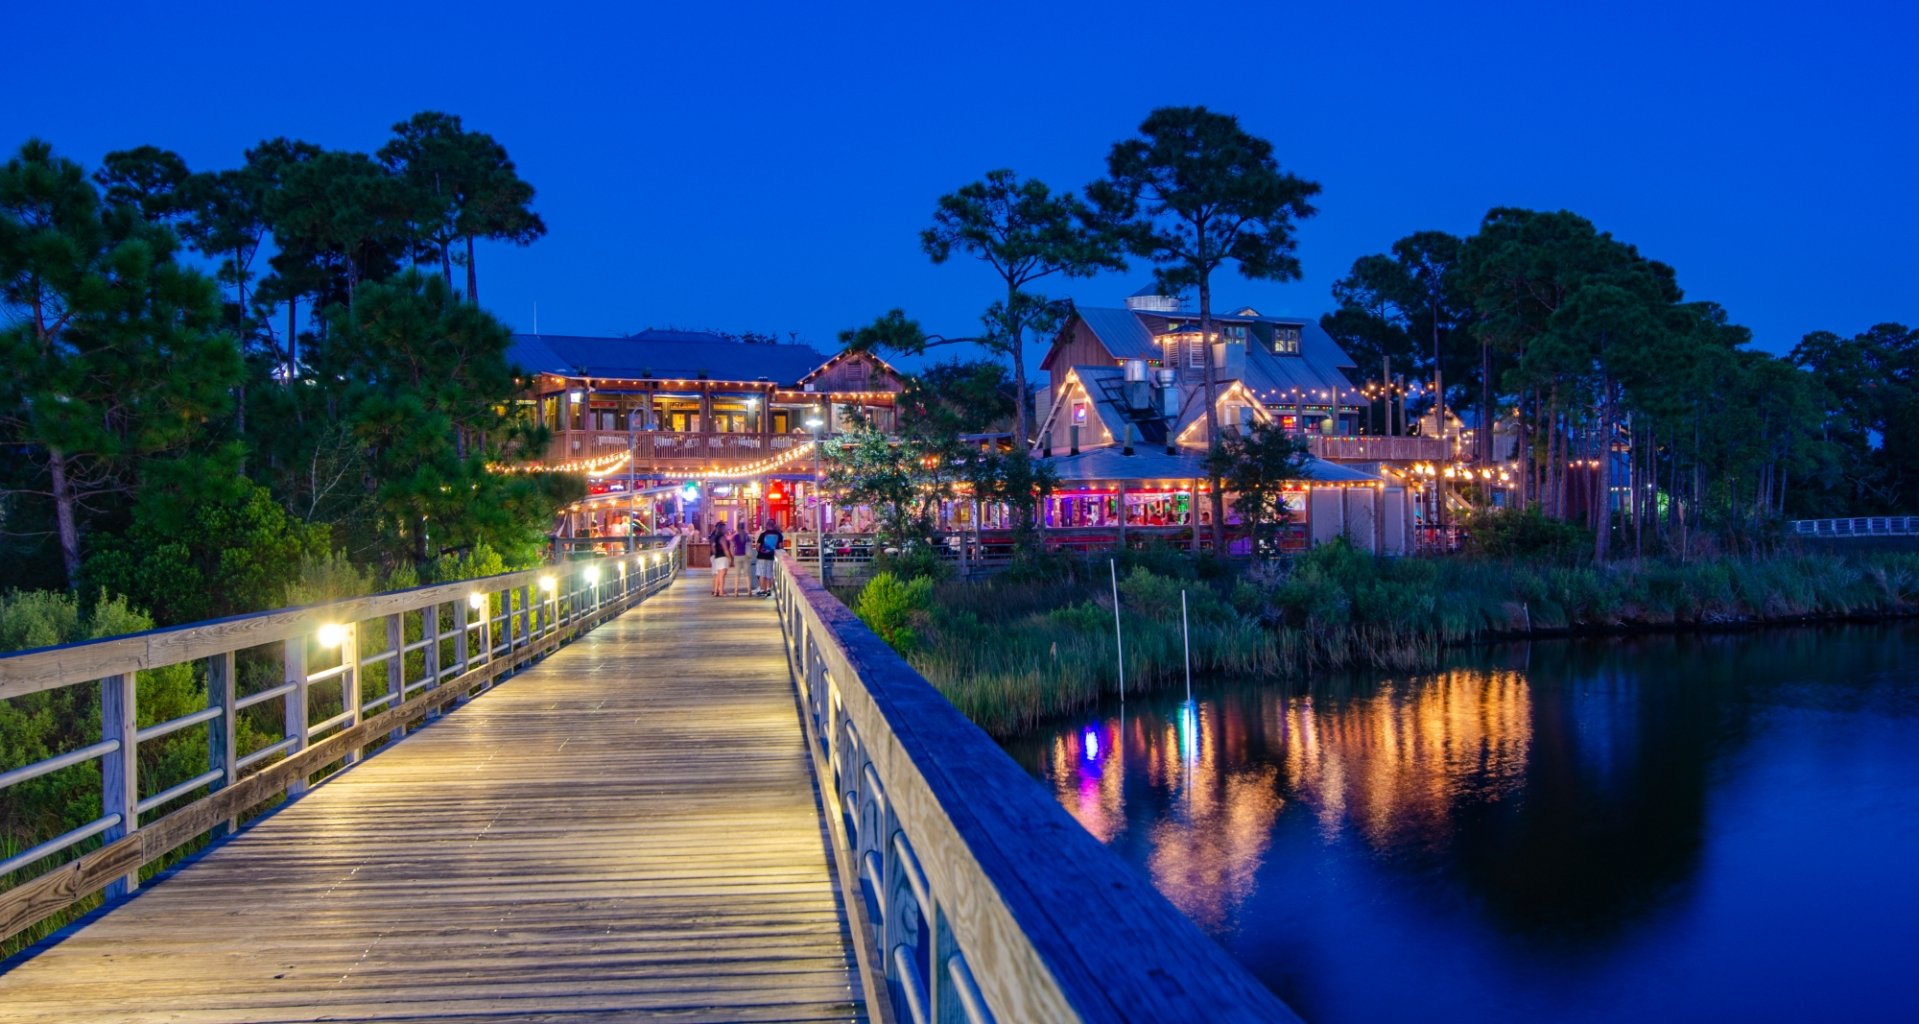 The village of Baytowne Wharf seen at night.